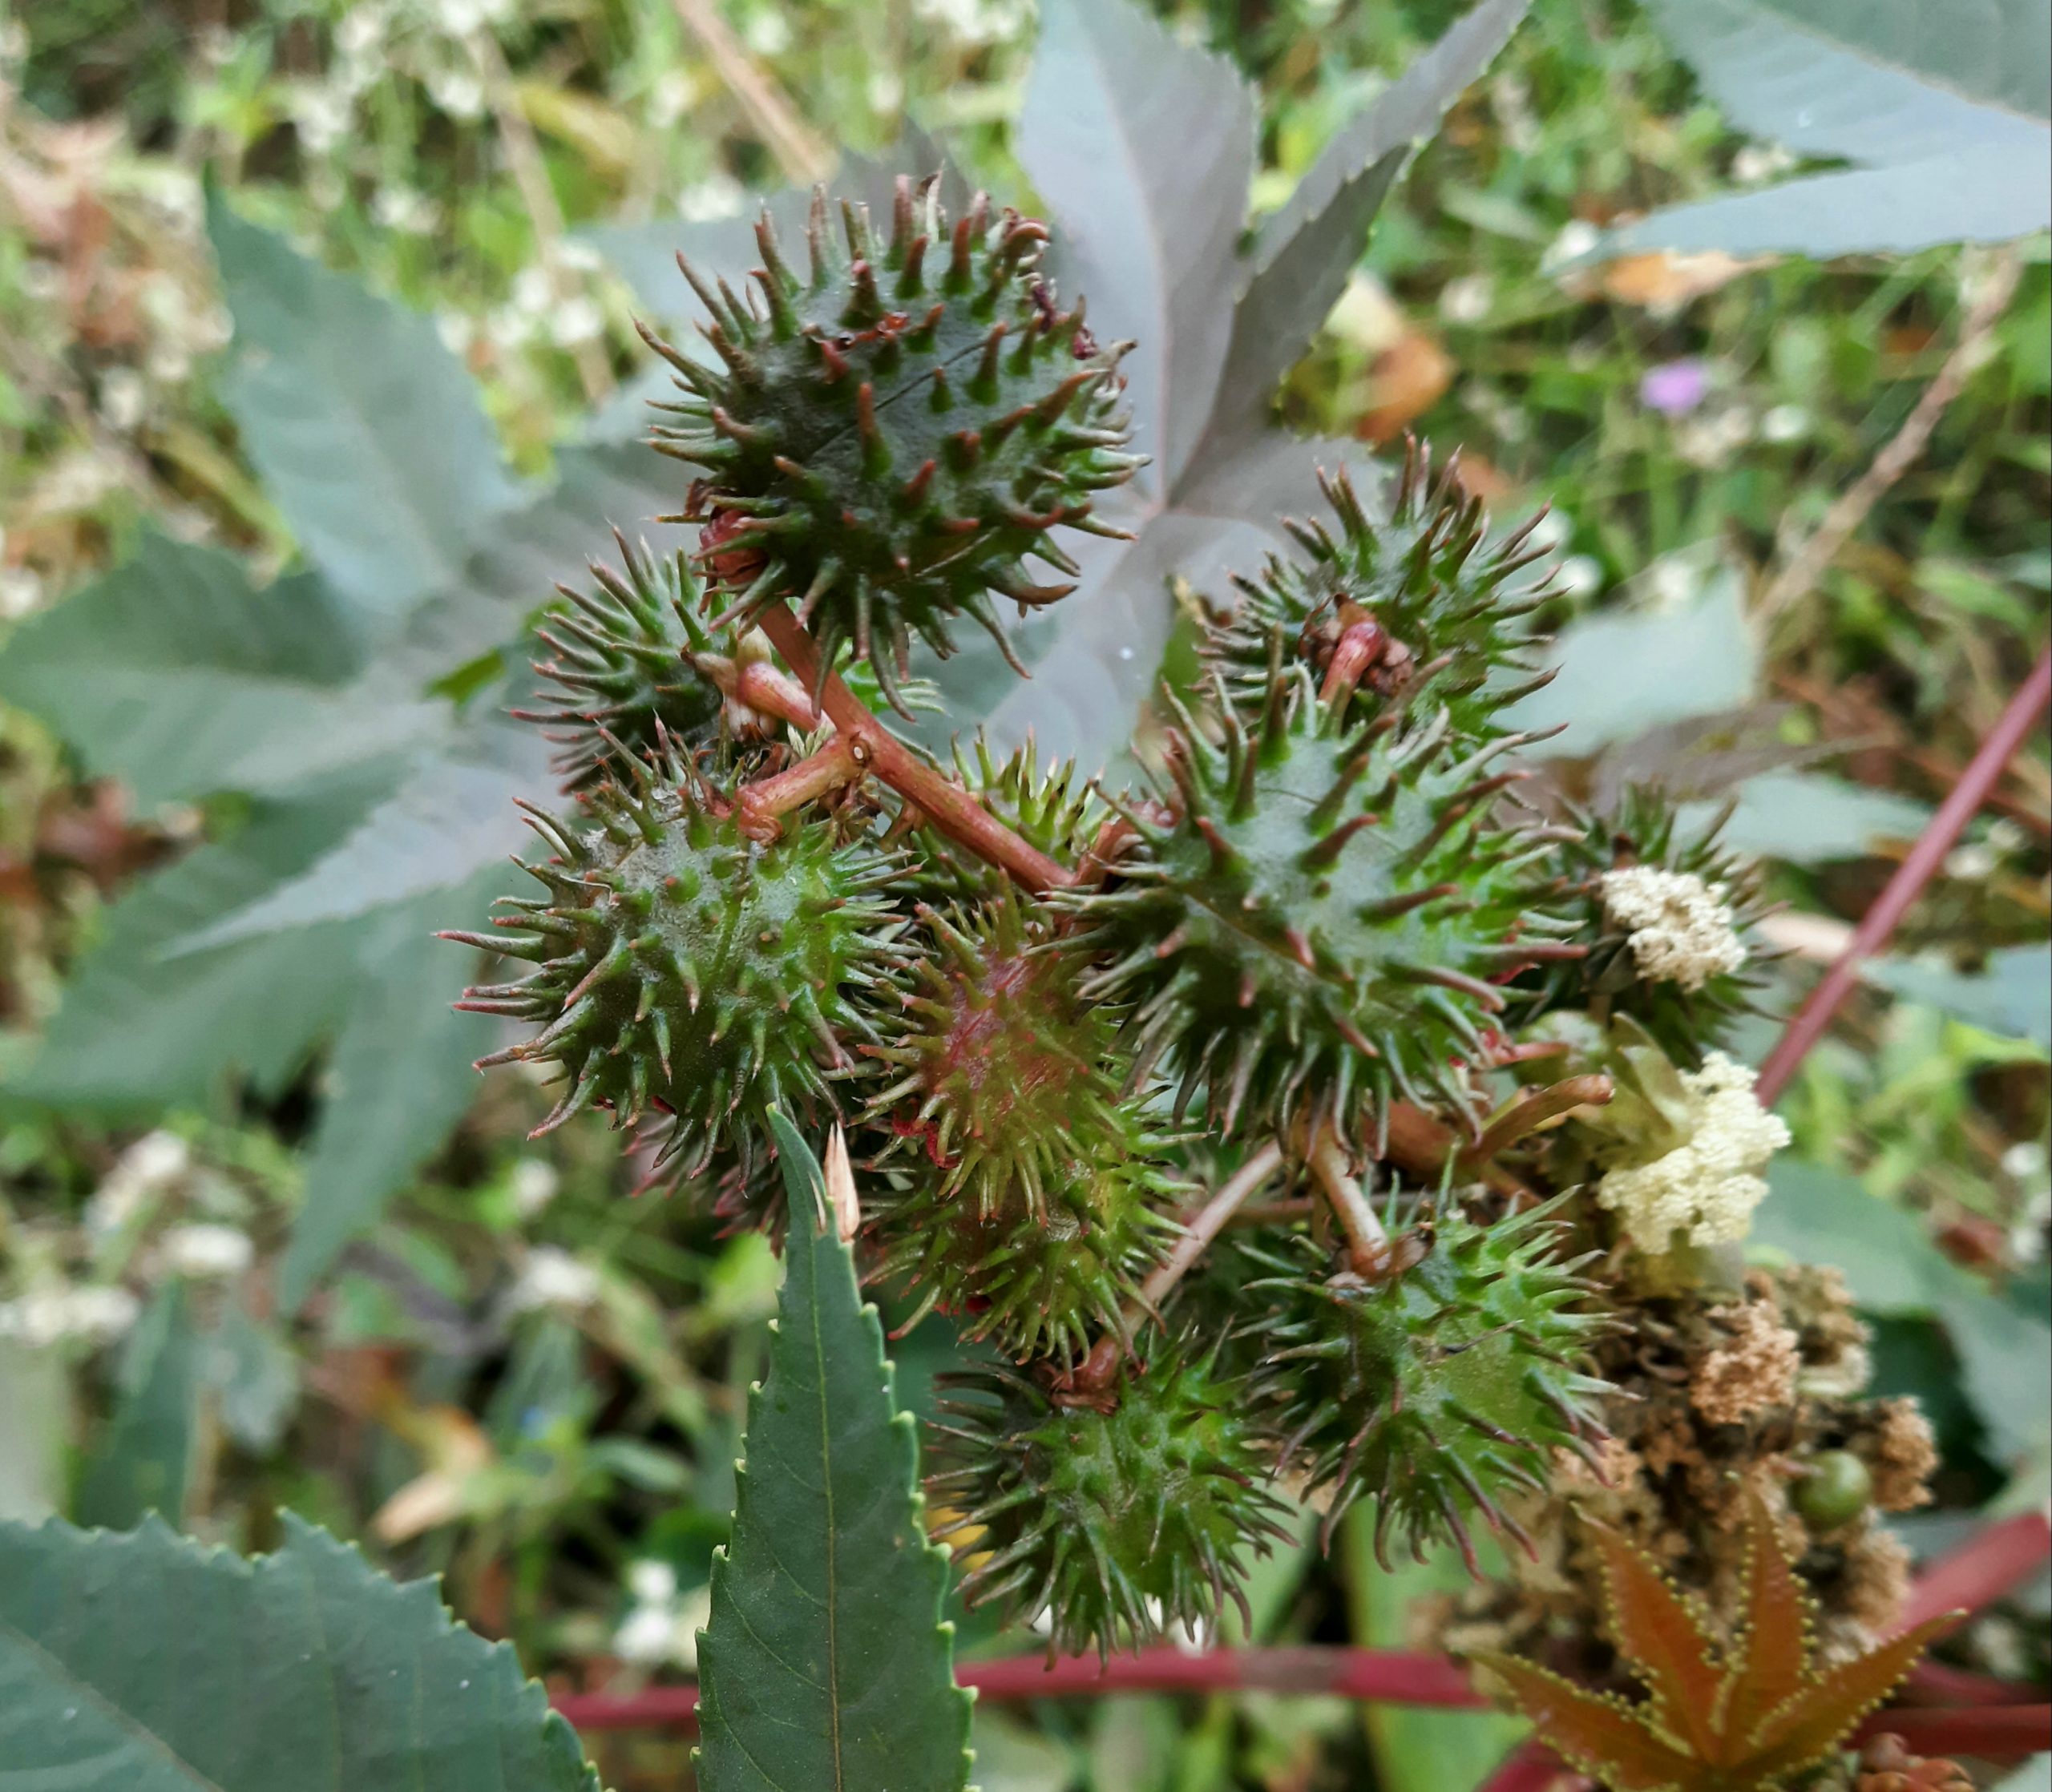 Thorny seed pods